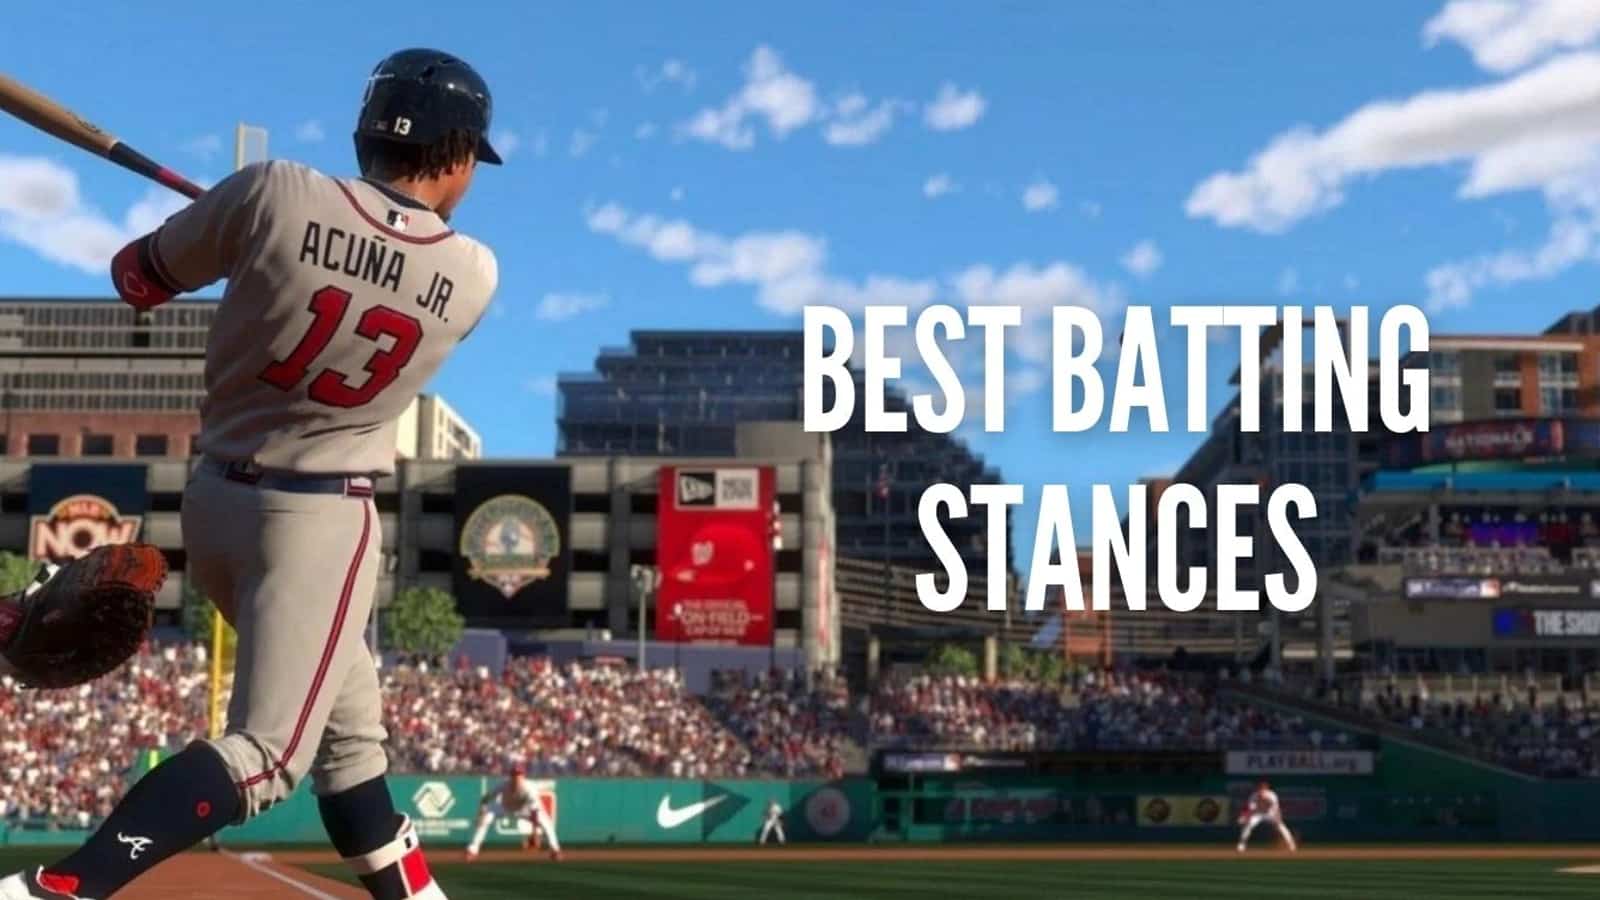 Ten Best Batting Stances by 2015 MLB Managers 